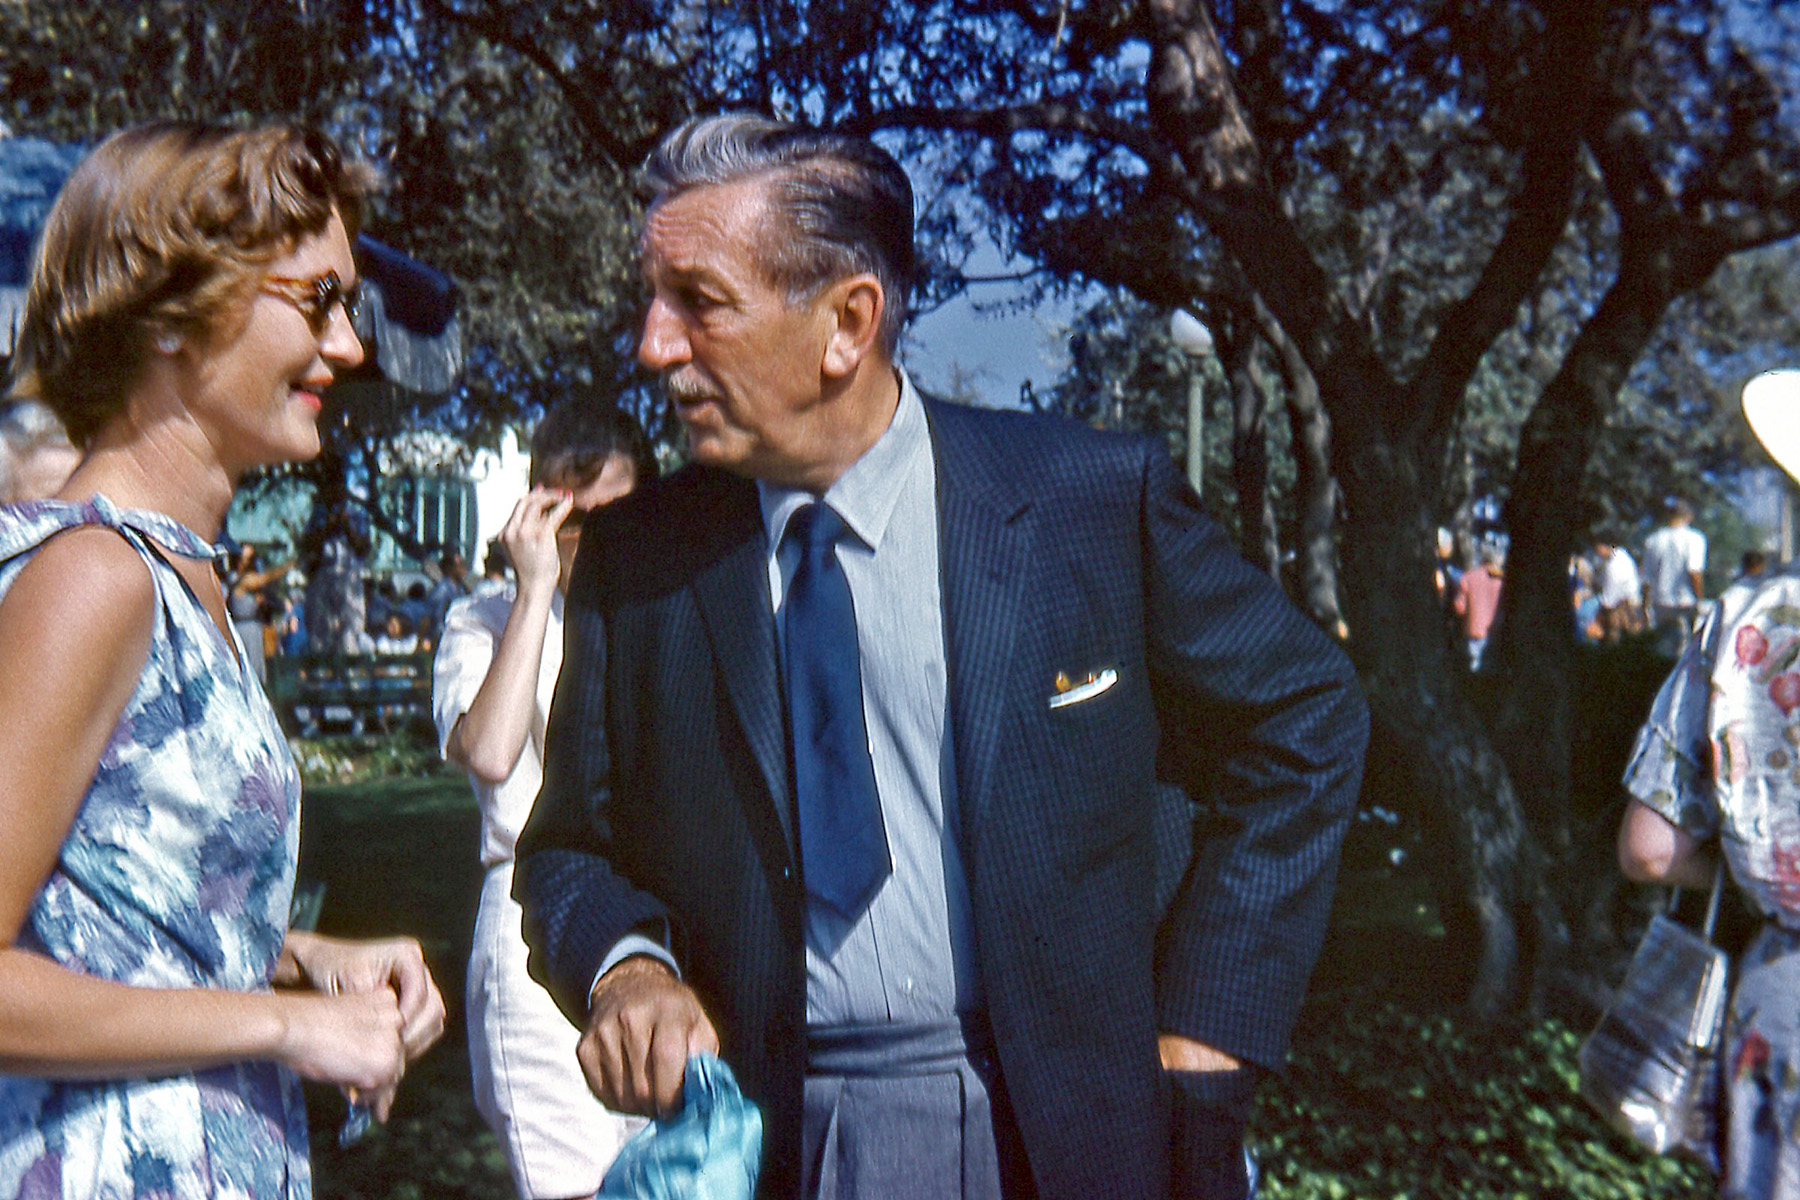 Disneyland, September, 1959. My mom in a close encounter with Walt Disney. When she asked him for an autograph, he politely declined, saying that she could write to his office for one. This seems consistent with what I heard many years ago, that he didn't like to spontaneously hand out autographs because his authentic signature wasn't quite like the official Disney logo. You can just make out the House of the Future in the background between them. View full size.